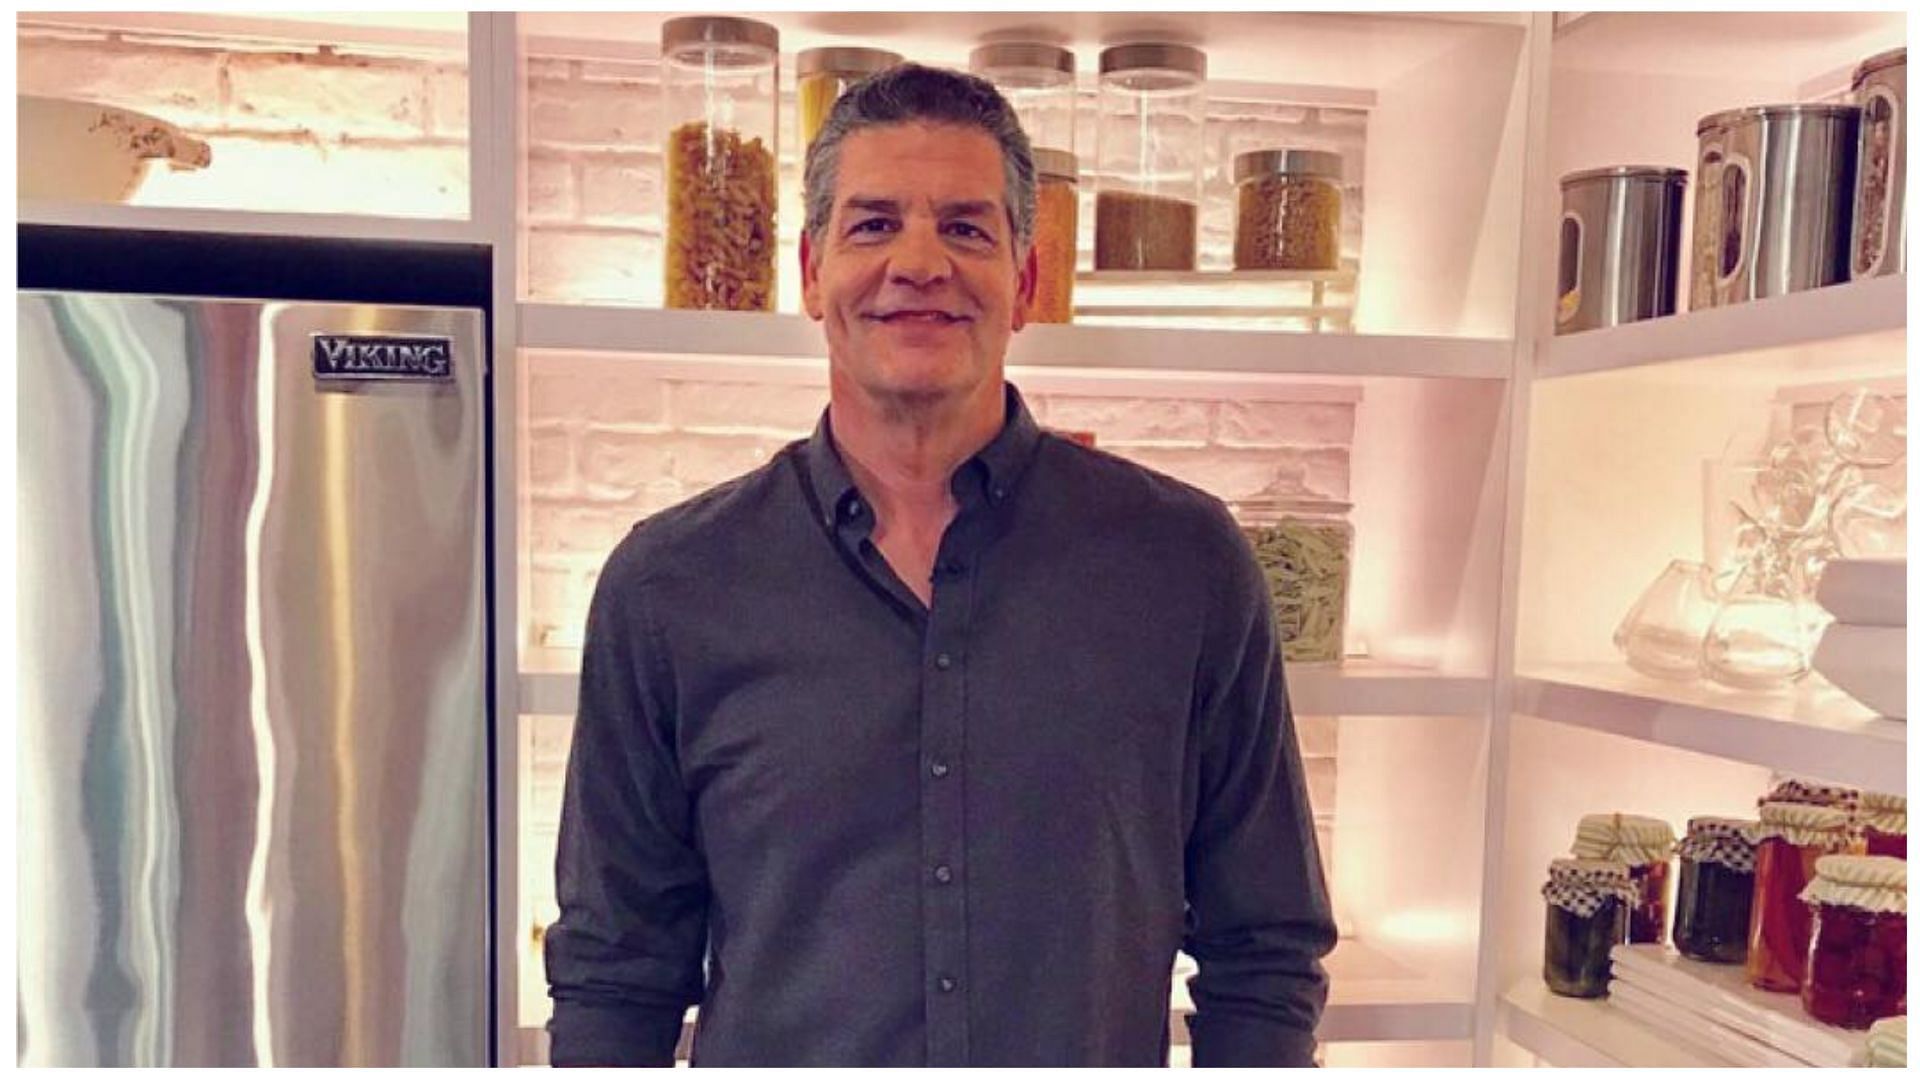 To better manage his condition, Mike Golic started by developing a game plan. (Image via Instagram)